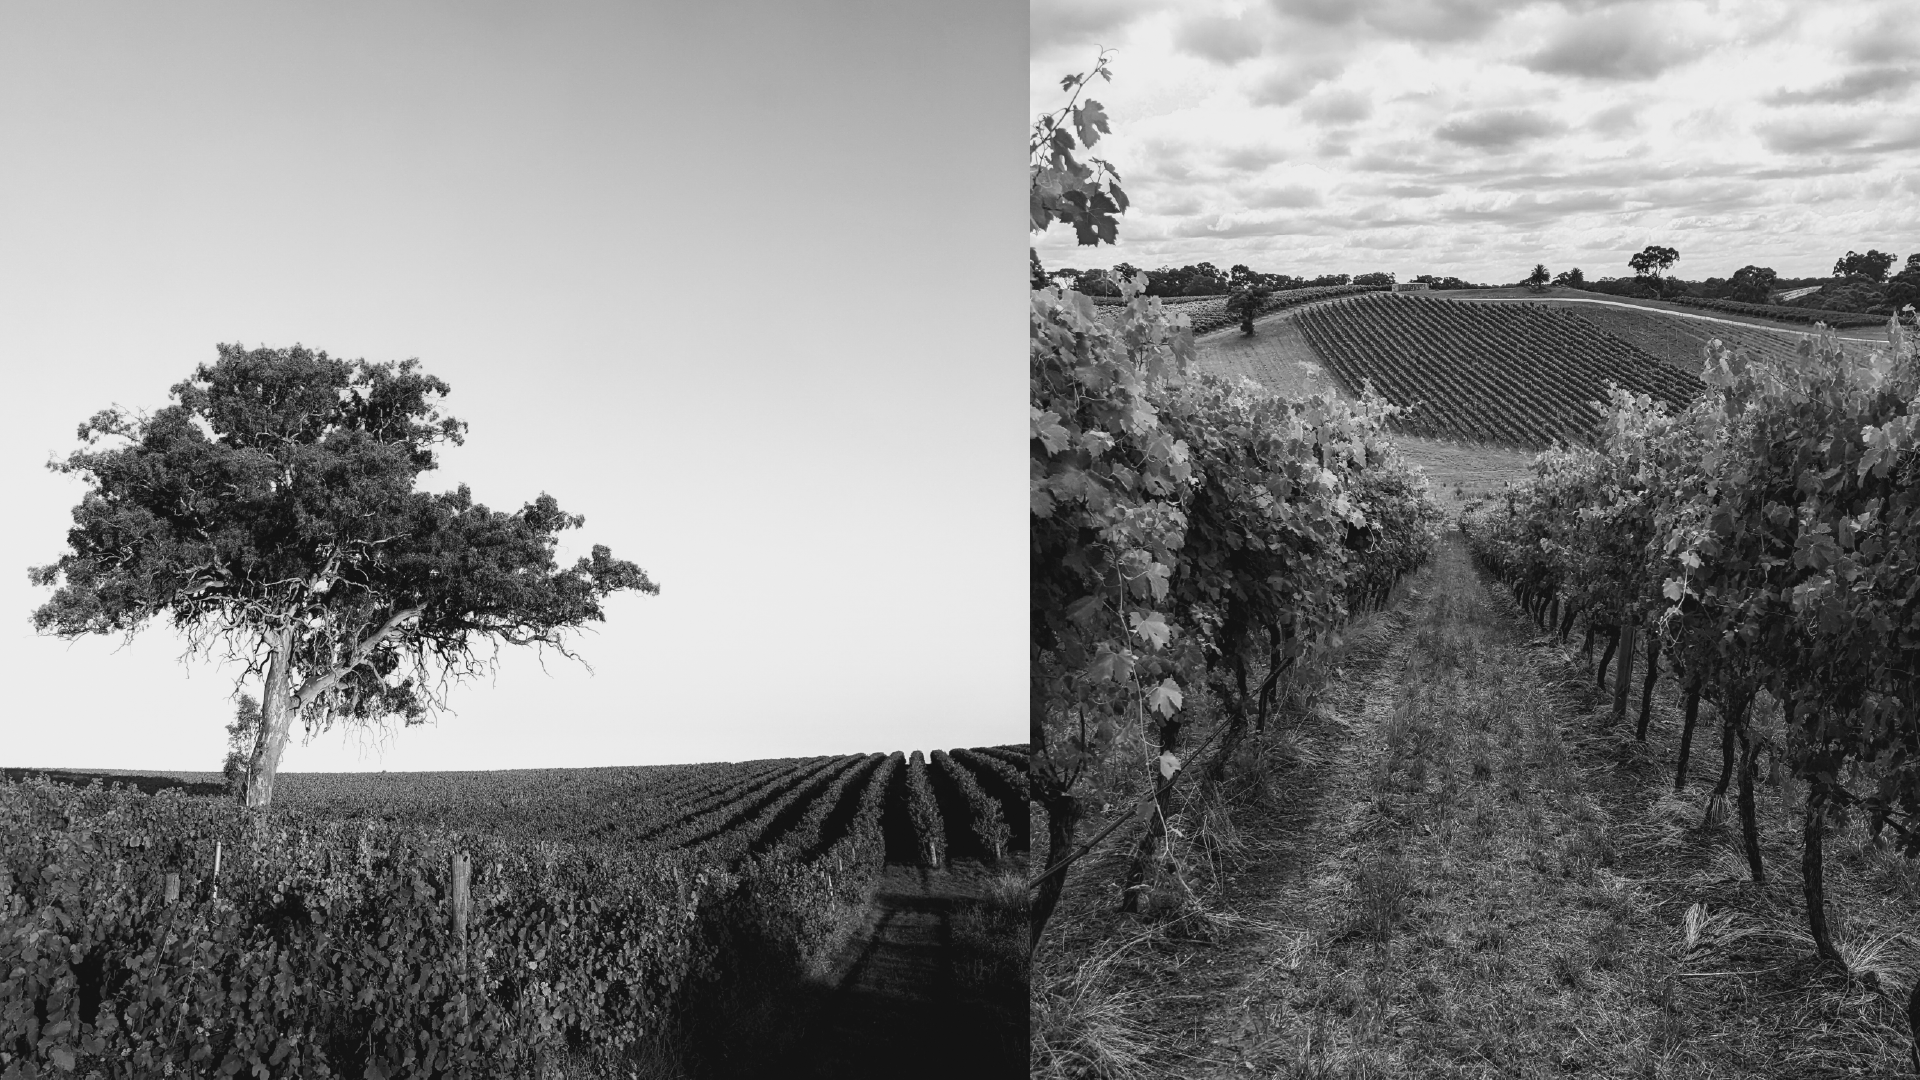 Black & white banner image. Left: Vineyard with large gumtree and clear sky. Right: Looking down between two rows of vines. In the distance another vineyard can be seen.